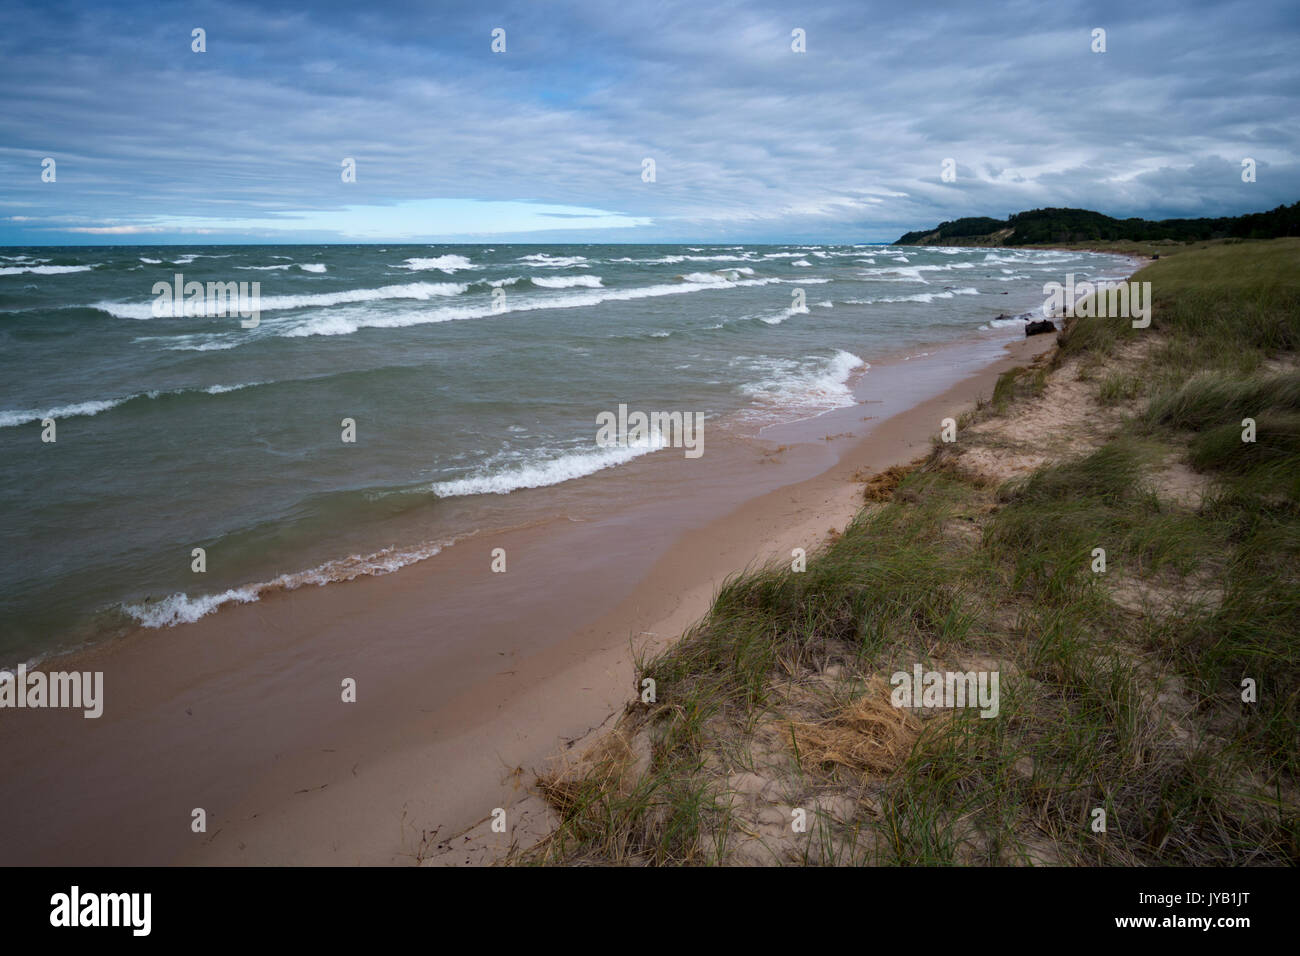 Lake Michigan near Whitehall, Michigan on a mid-August, stormy, blustery day with 5 to 6 foot waves crashing onto the beach. Stock Photo